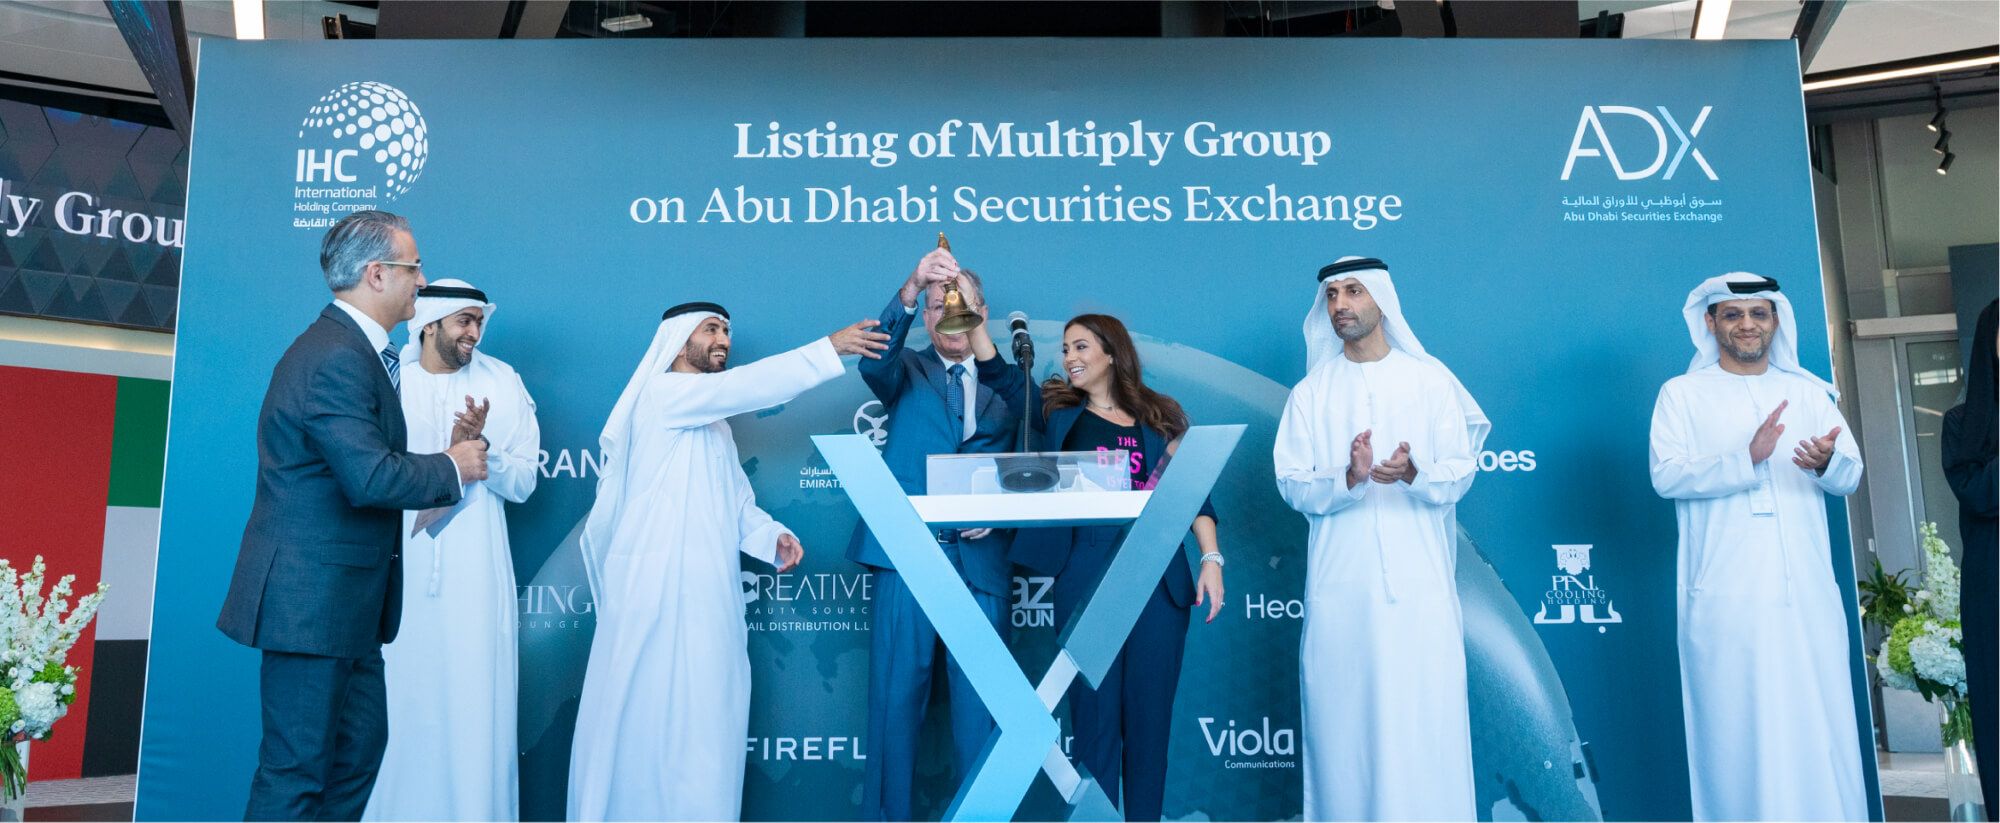 Shares in Multiply Group end first day of trading 80% higher than pre-listing valuation